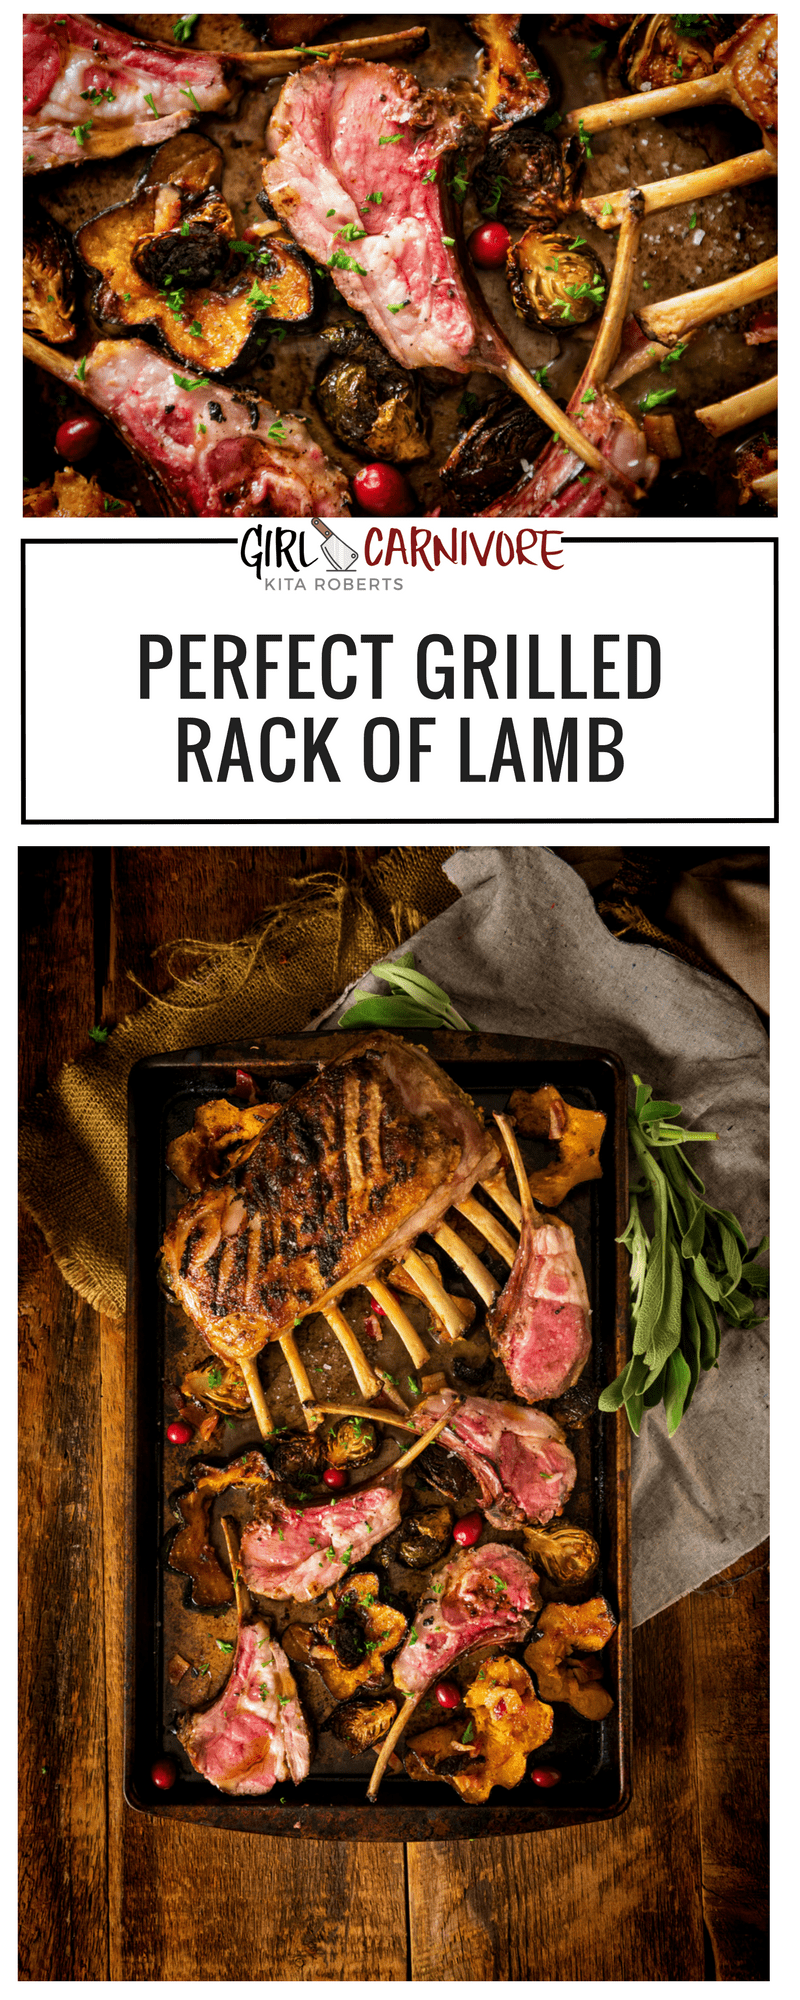 This Perfect Grilled Rack of Lamb recipe comes out amazing every single time. Have your butcher French the rack for you to make slicing easy and presentation stunning. 